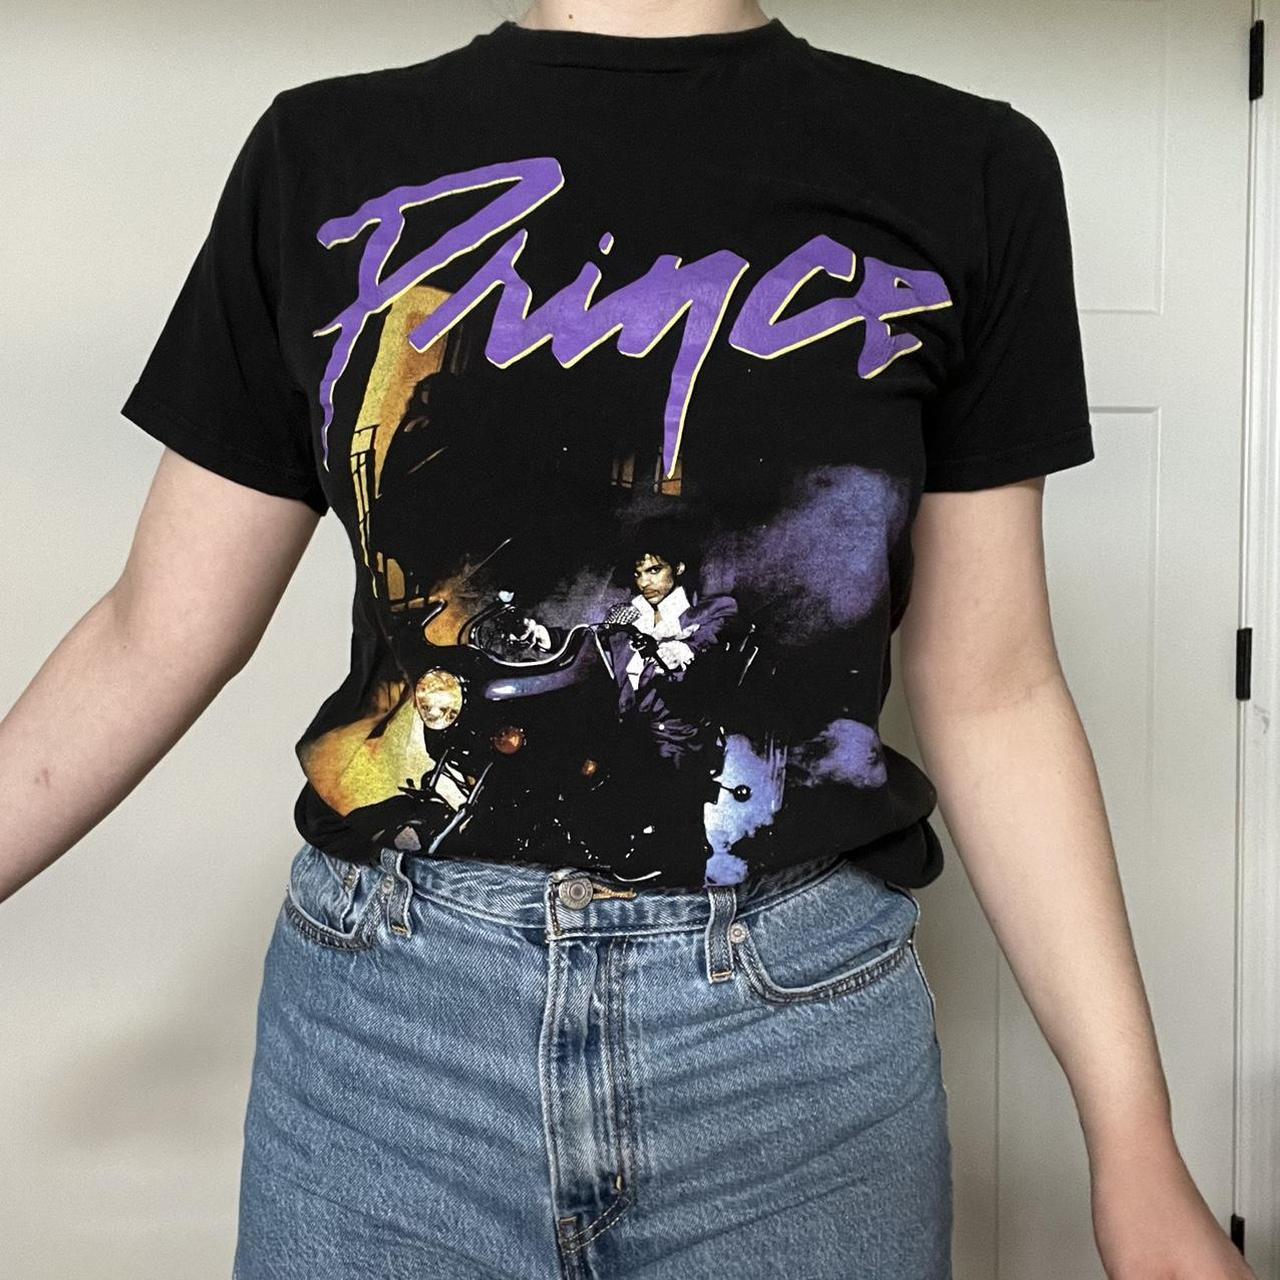 Product Image 1 - PRINCE GRAPHIC TEE

Brand: Prince
Size: Medium
Details: